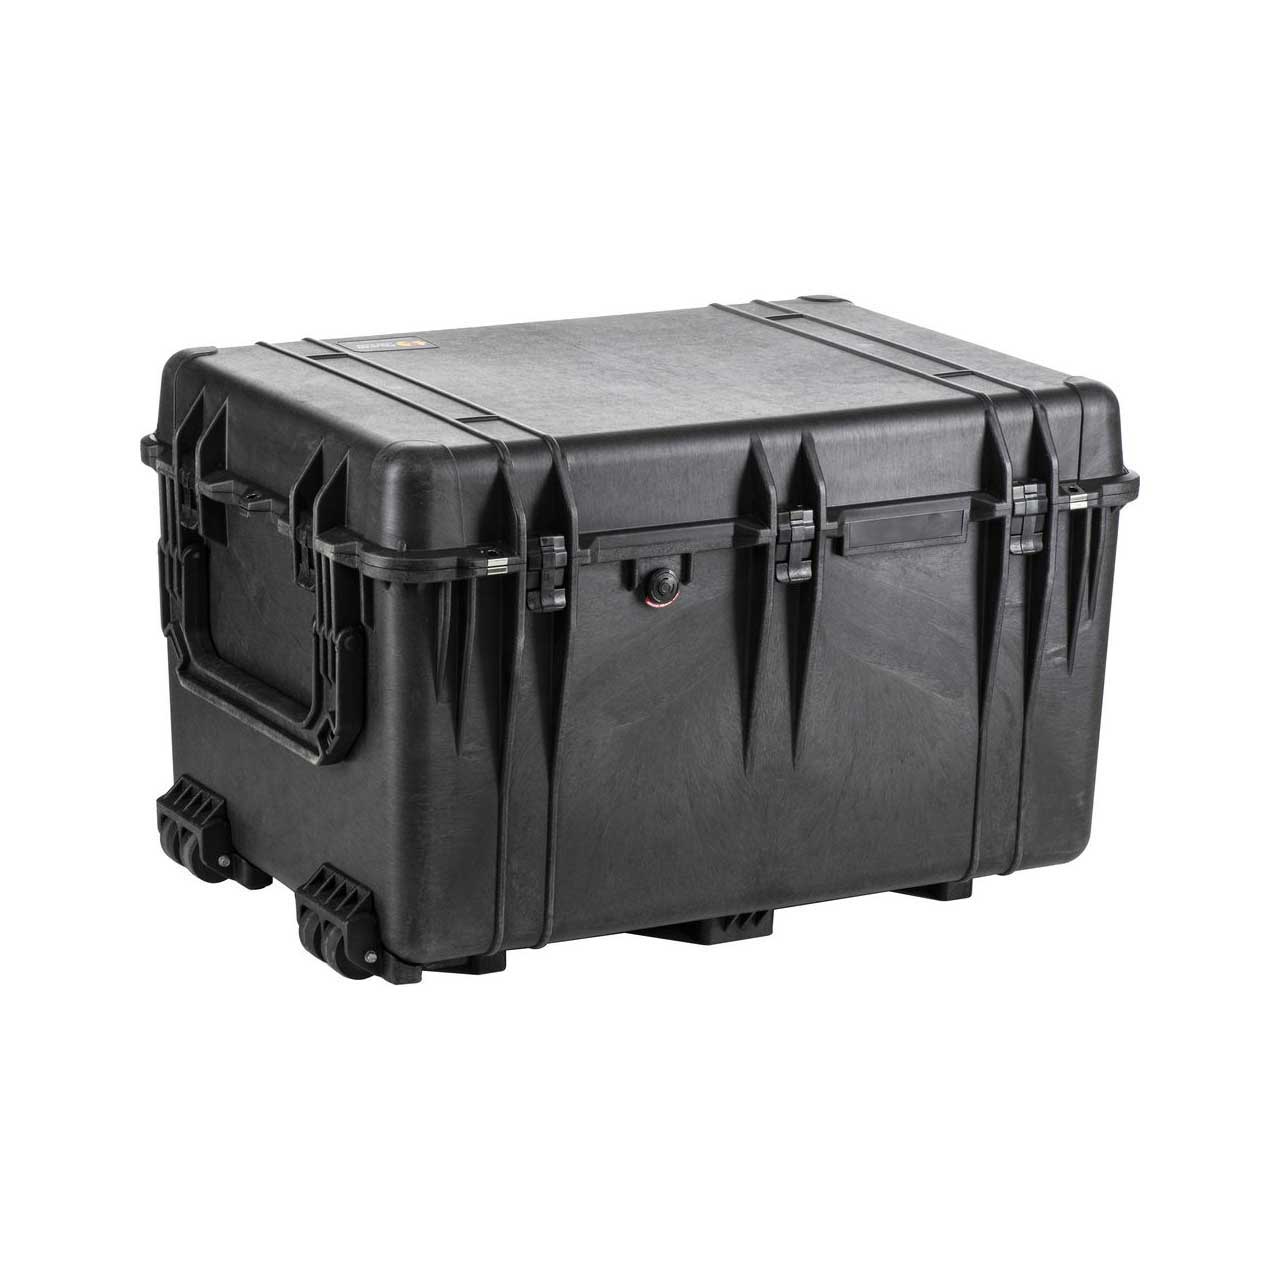 Pelican 1664 Protector Case with Padded Dividers - Black